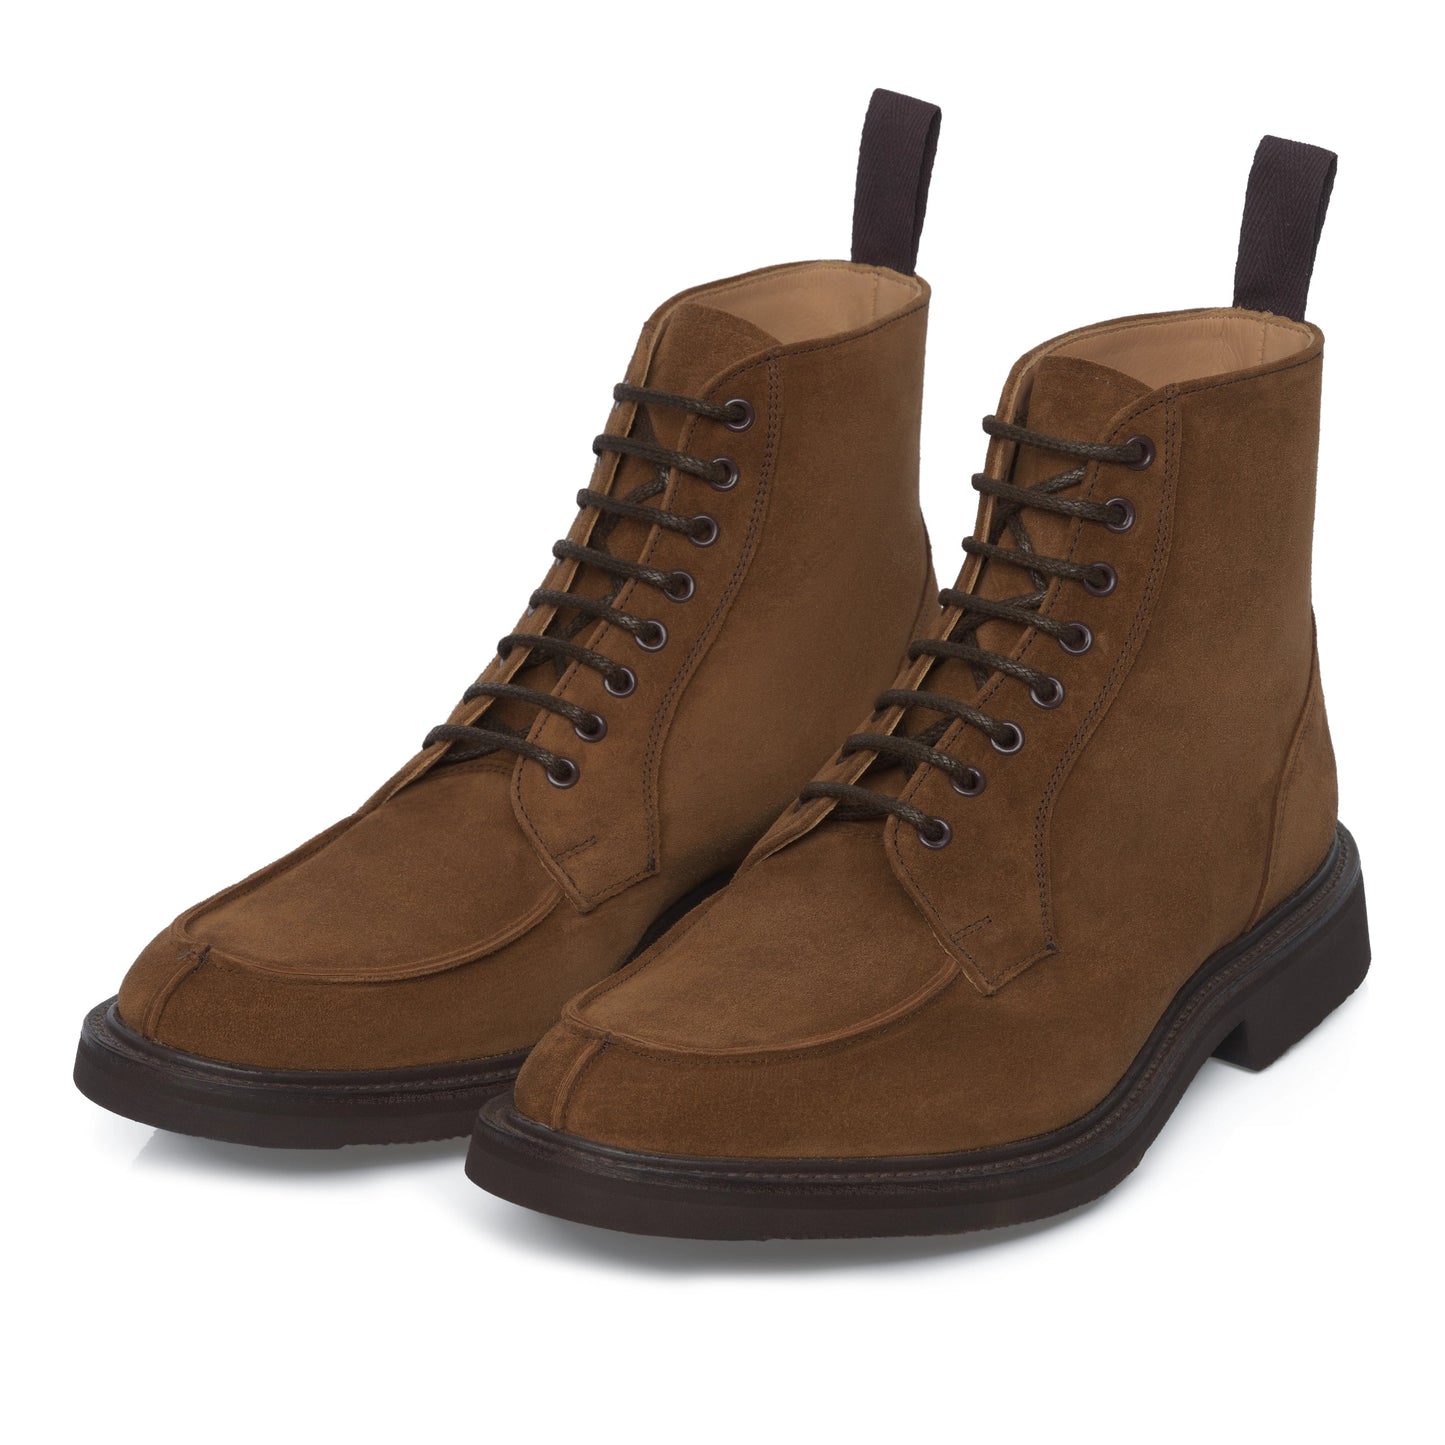 Tricker's "Lawrence" Apron Front Derby Boots in Cubana - SARTALE